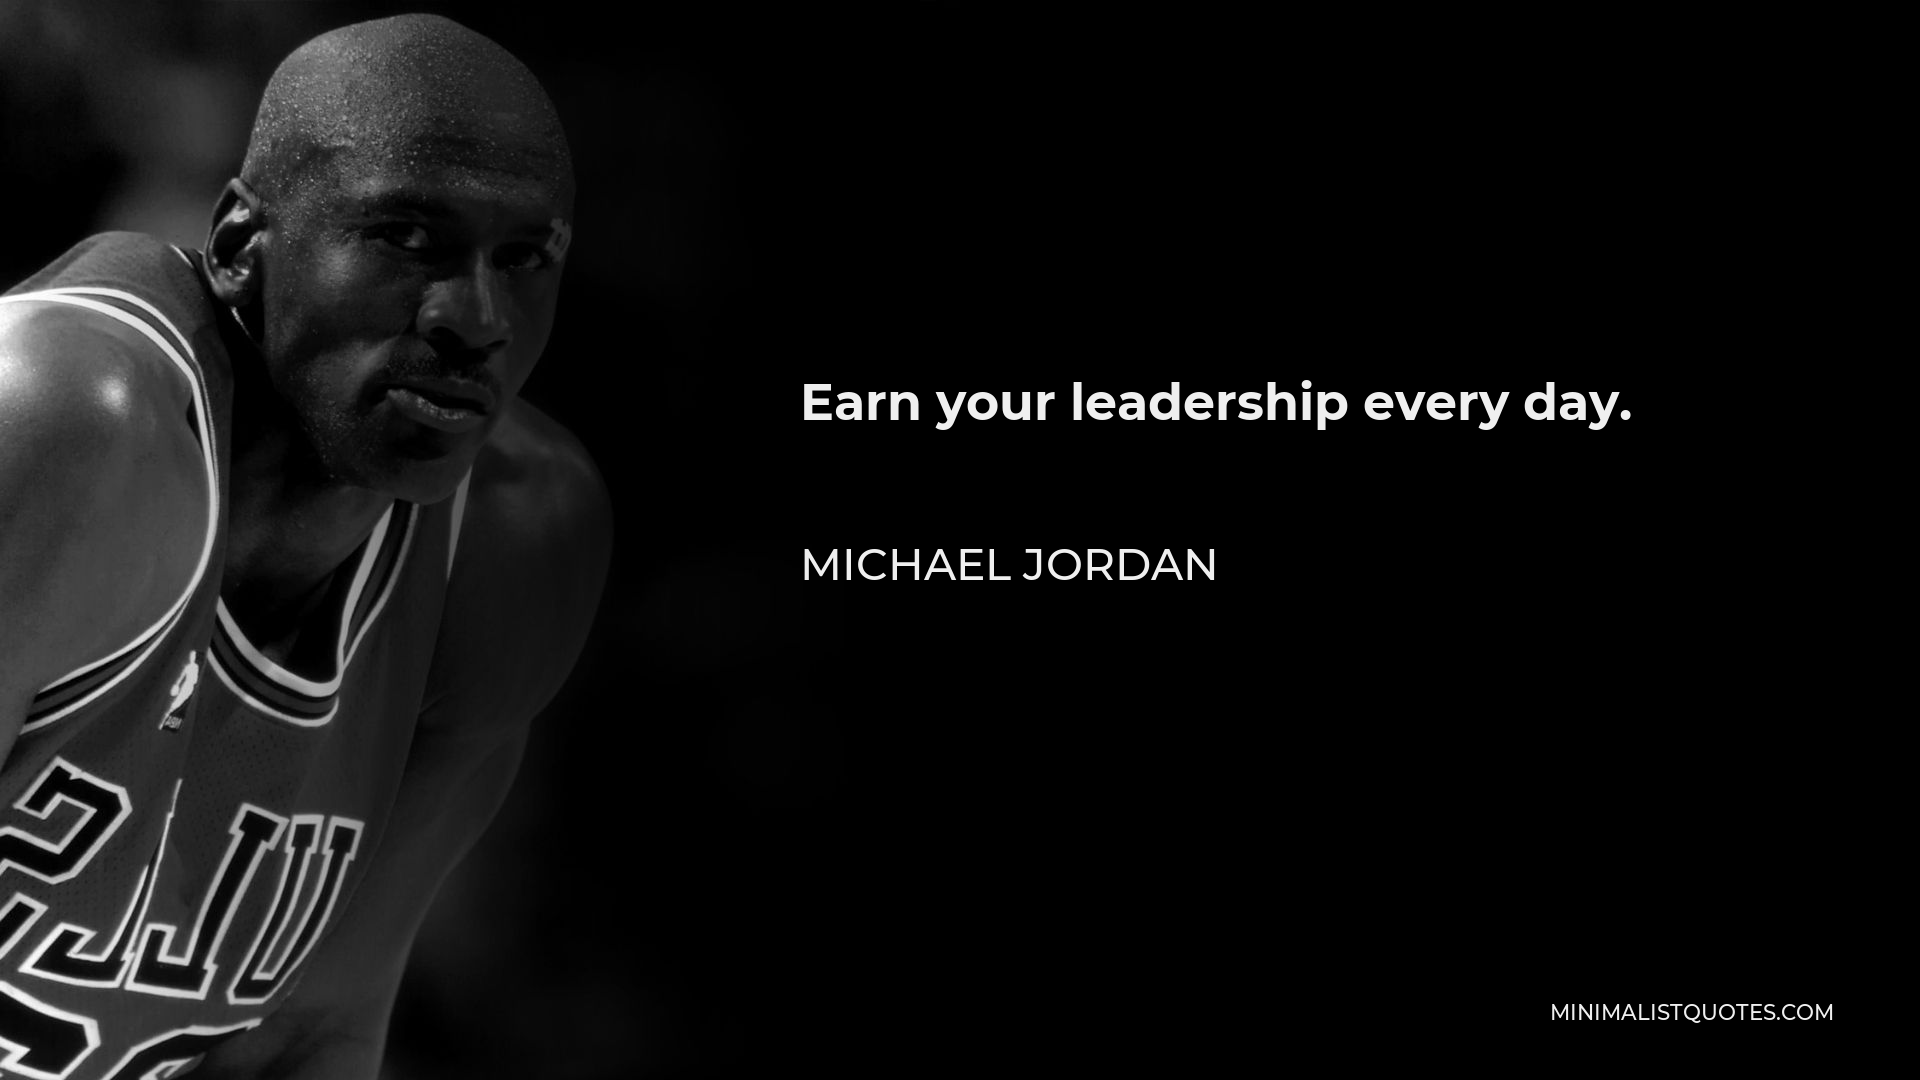 Michael Jordan Quote - Earn your leadership every day.